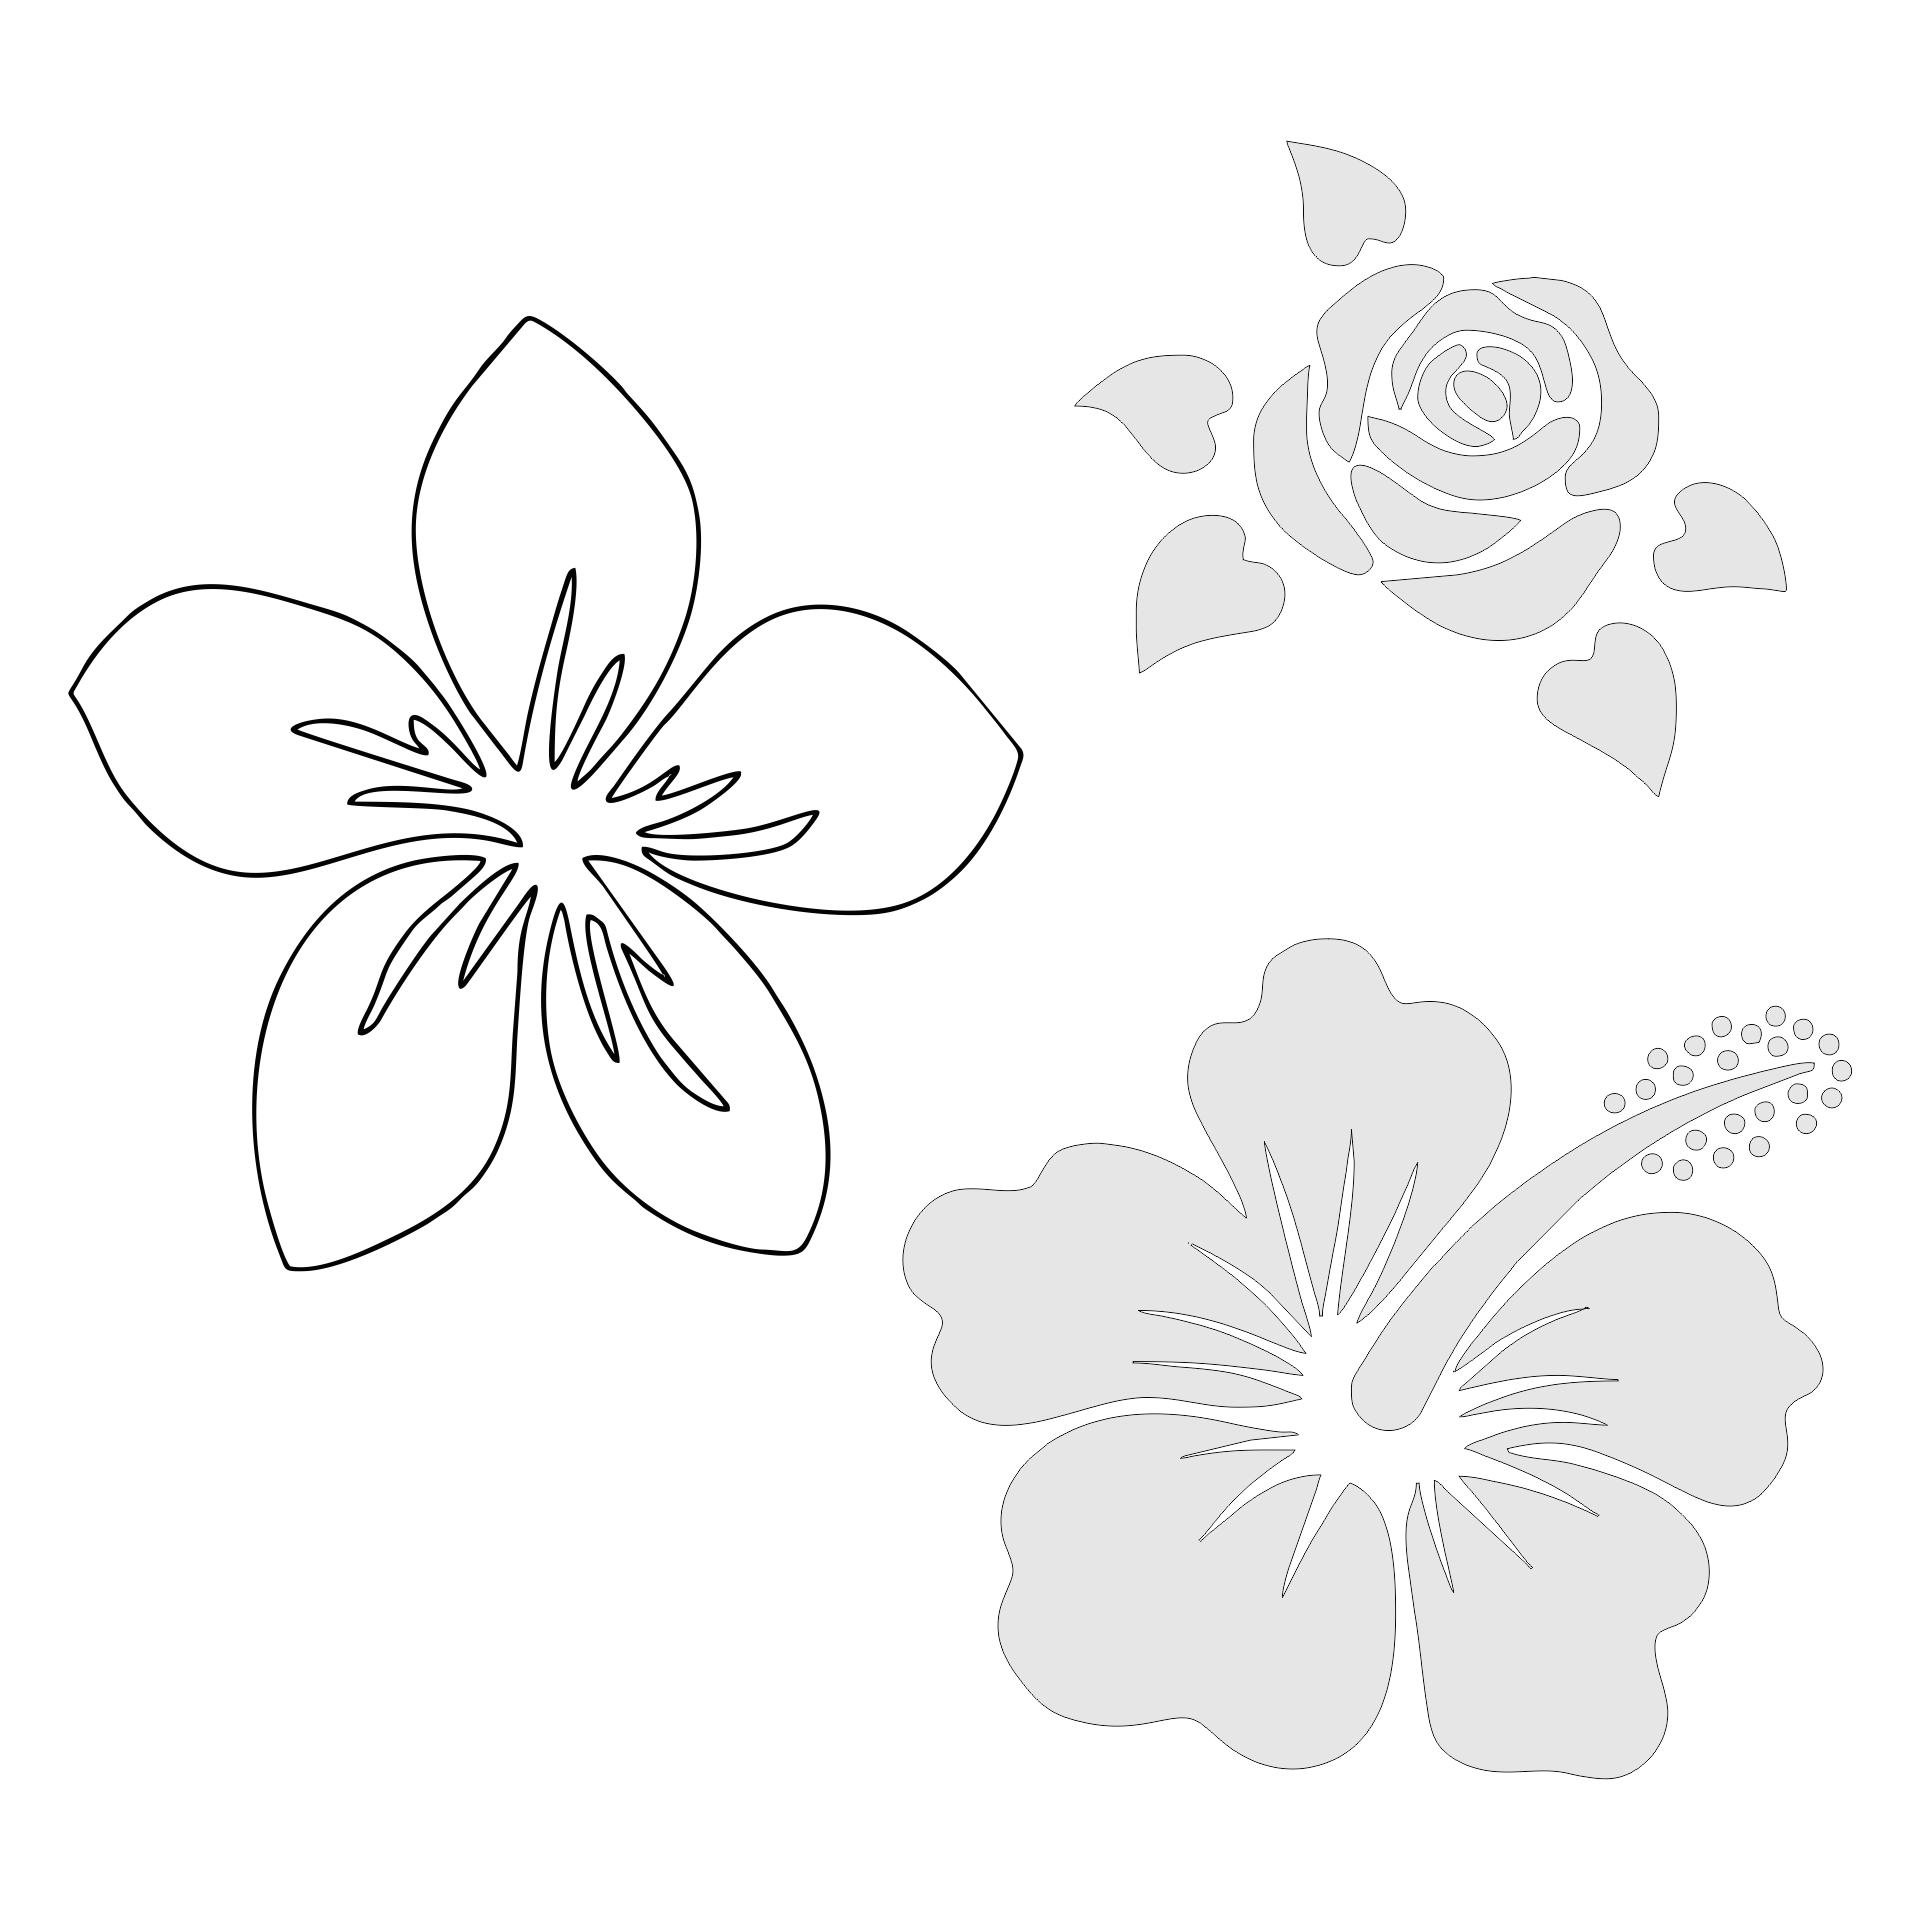 8 Best Images Of Large Flower Stencils Printable Printable Large Flower Template Free